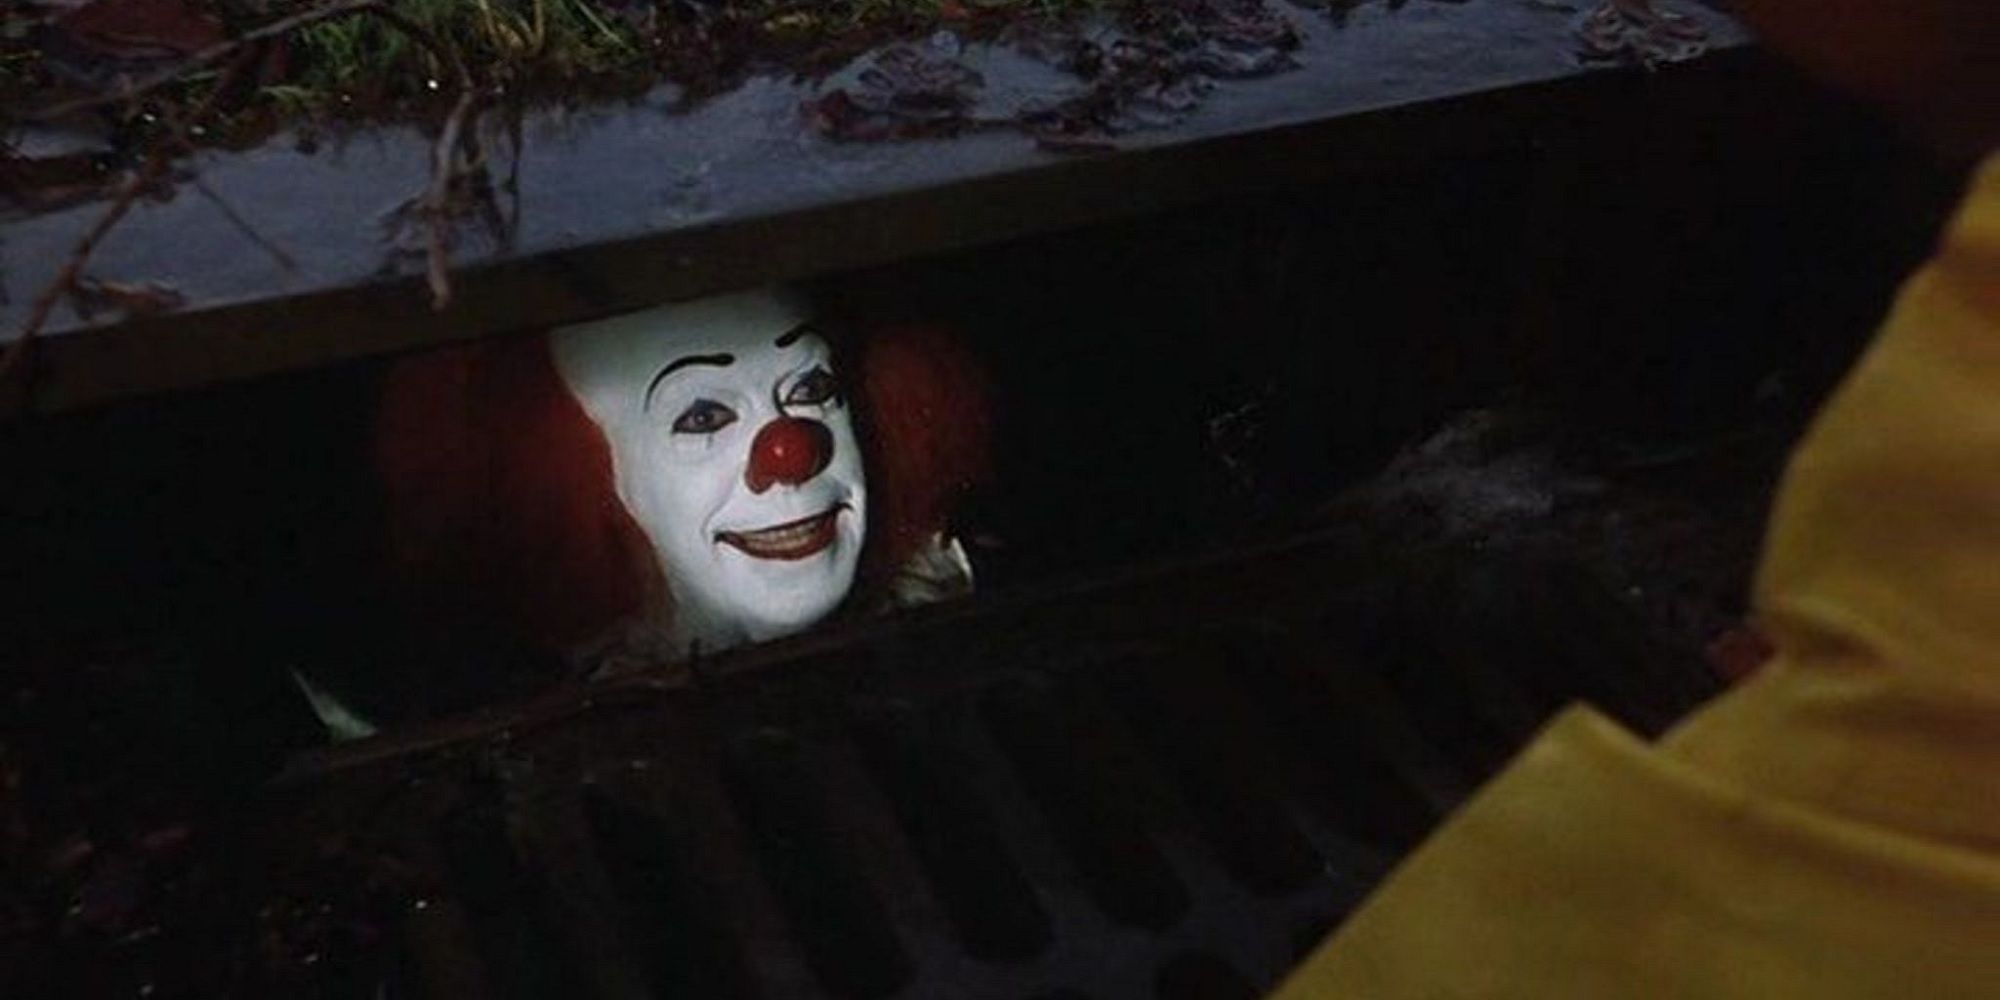 Stephen King's IT - Pennywise down the storm drain